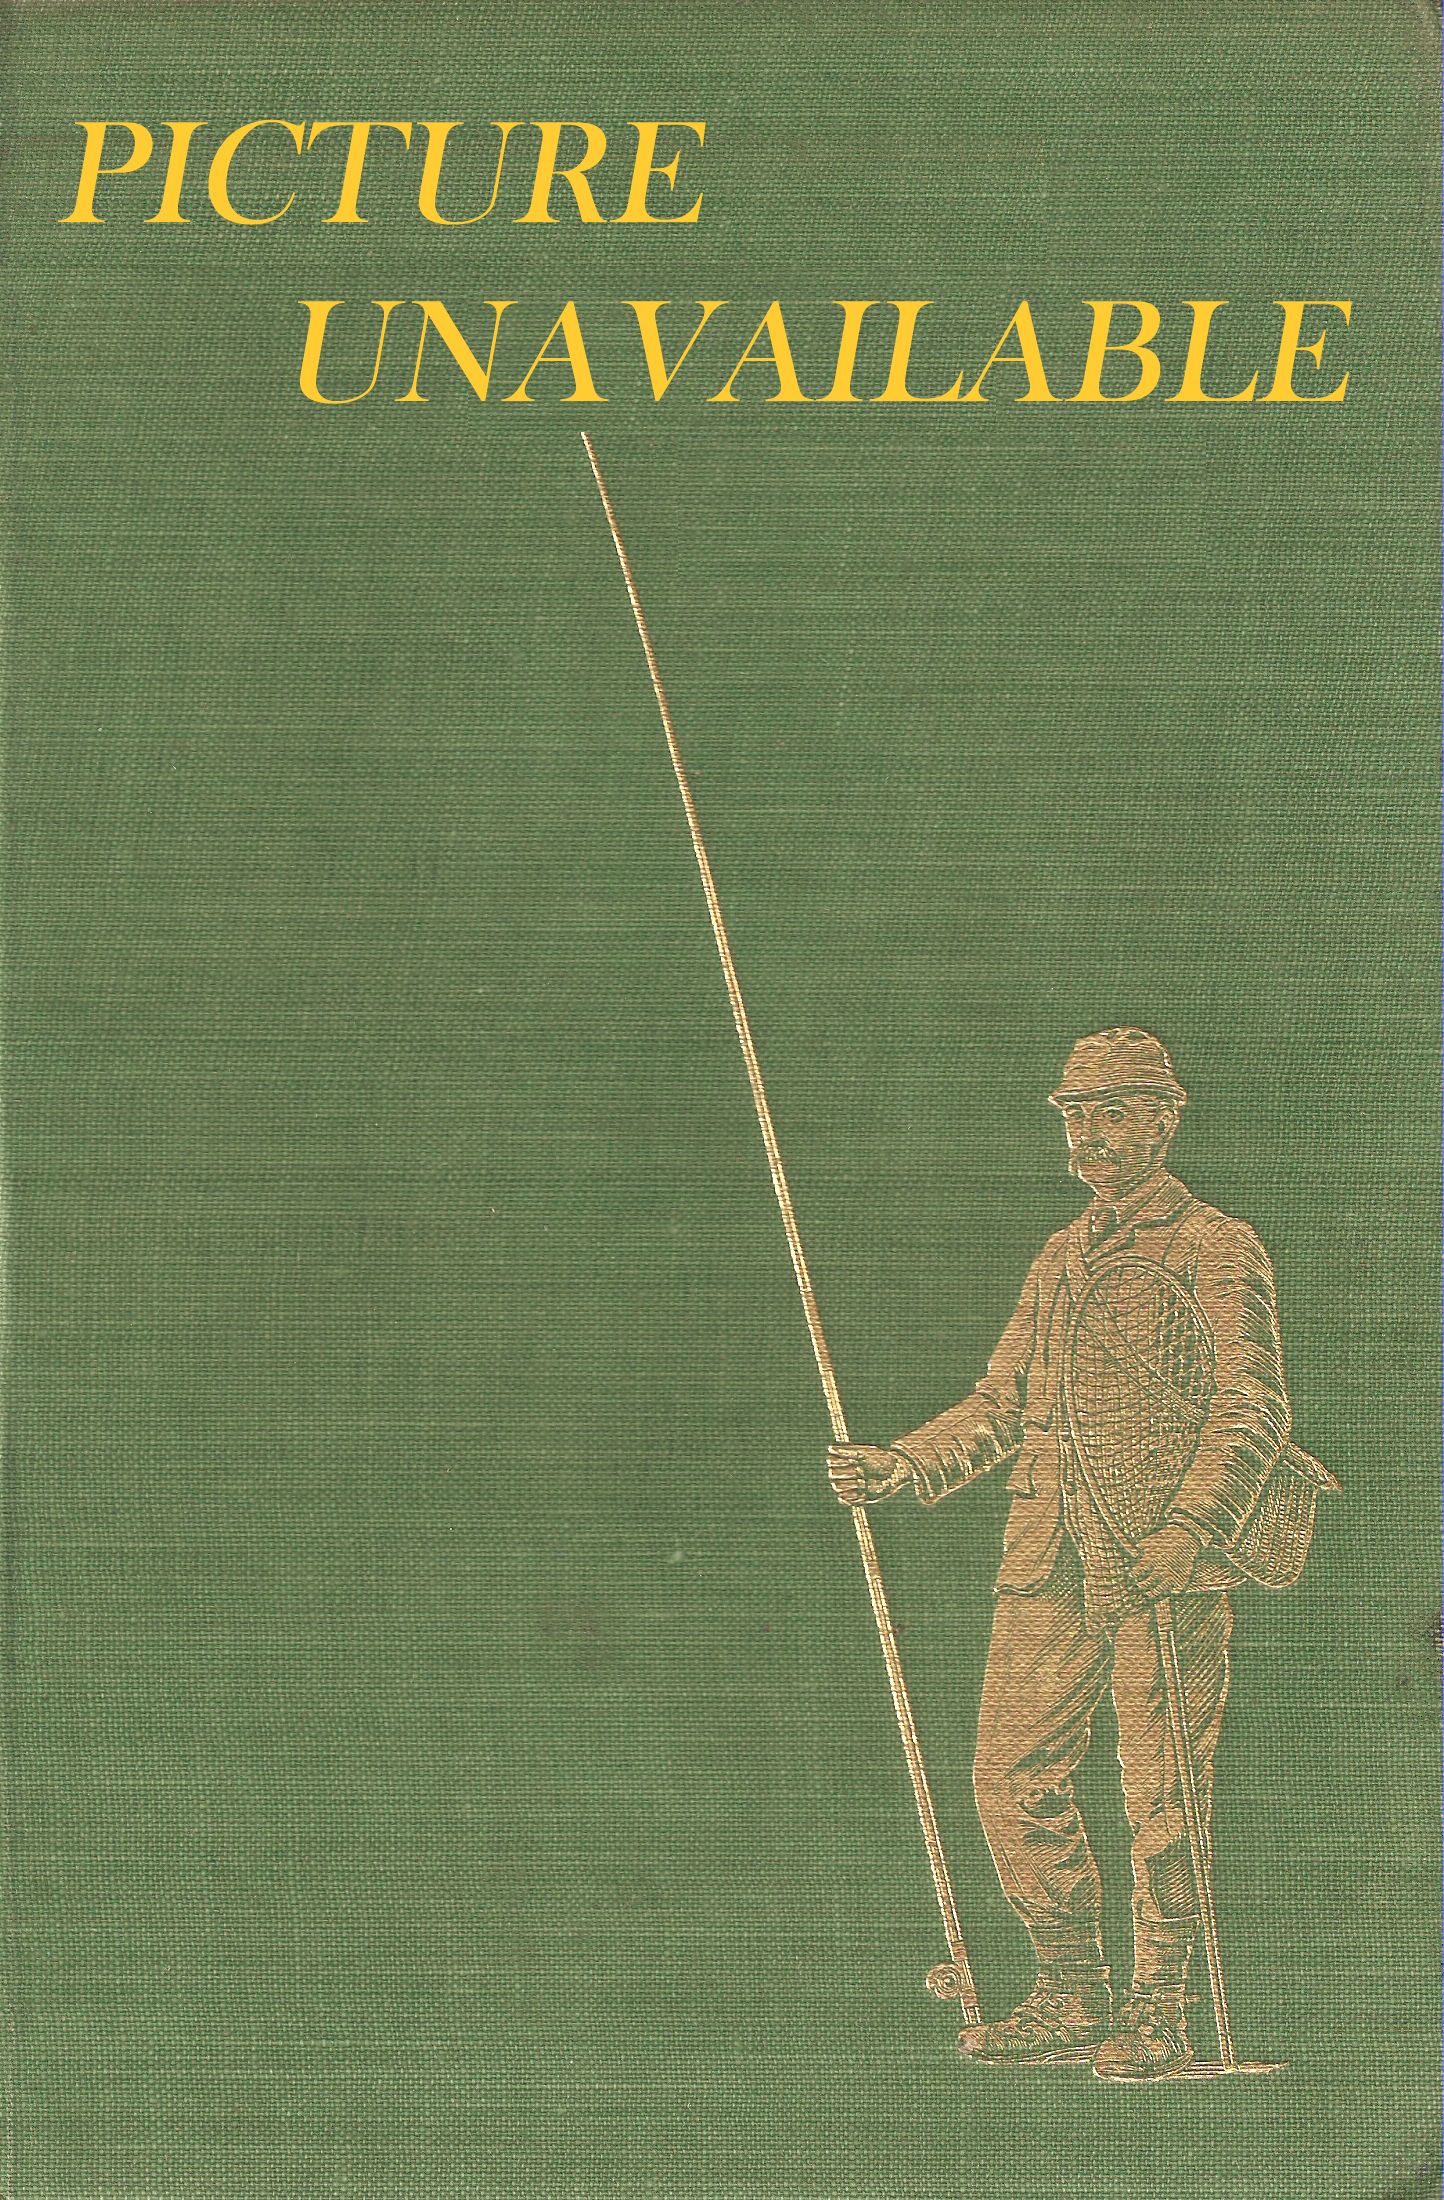 THE FISHERMAN'S COMPANION. Edited by Kenneth Mansfield.